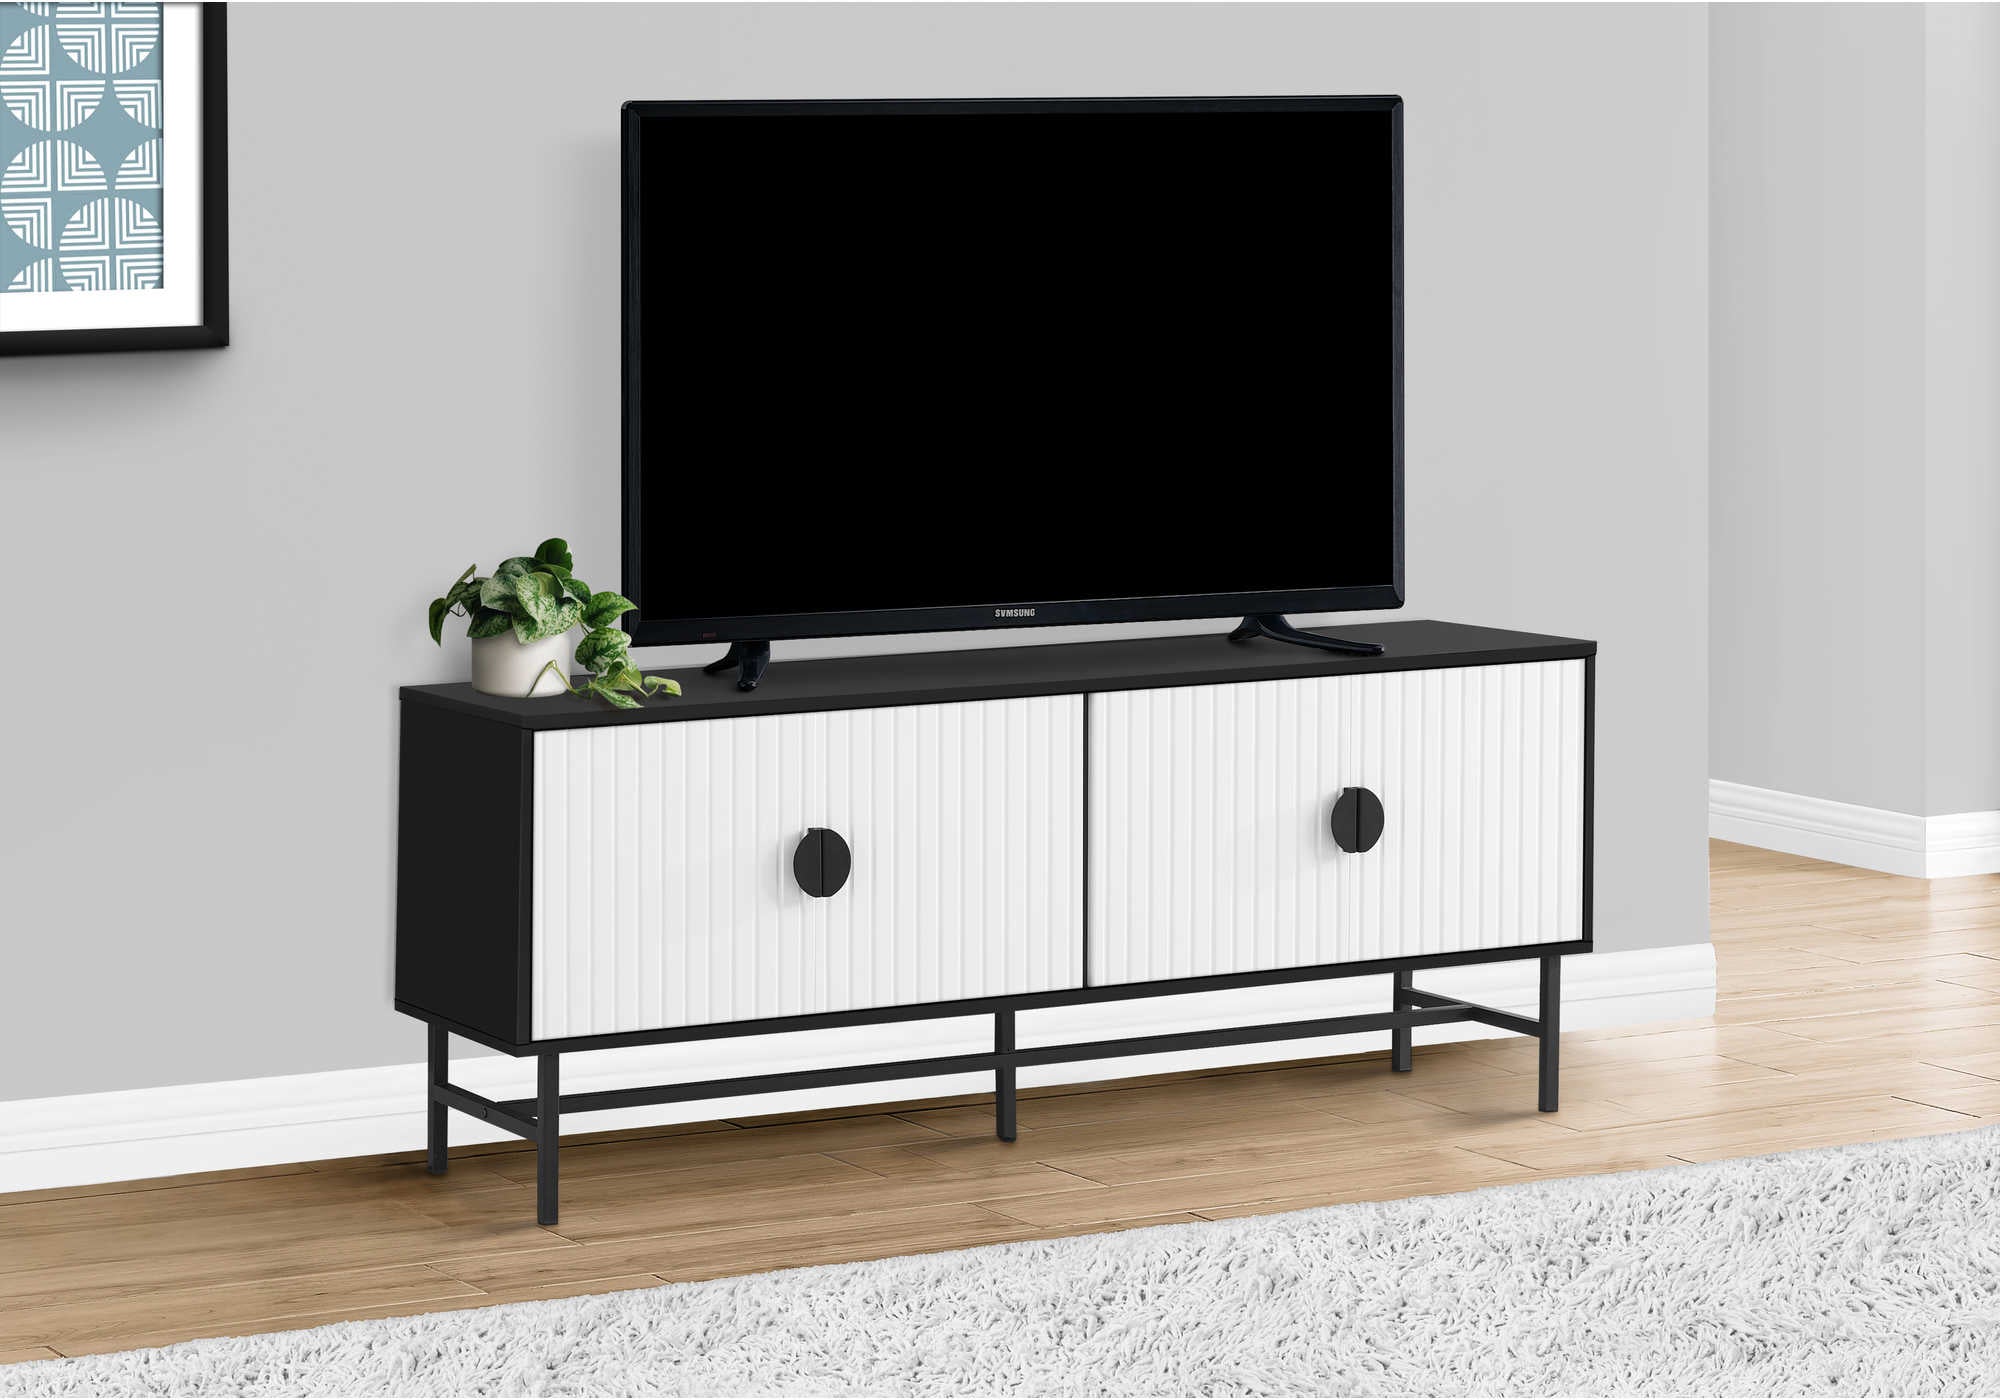 TV STAND - 60L  BLACK  WHITE DOORS WITH BLACK METAL